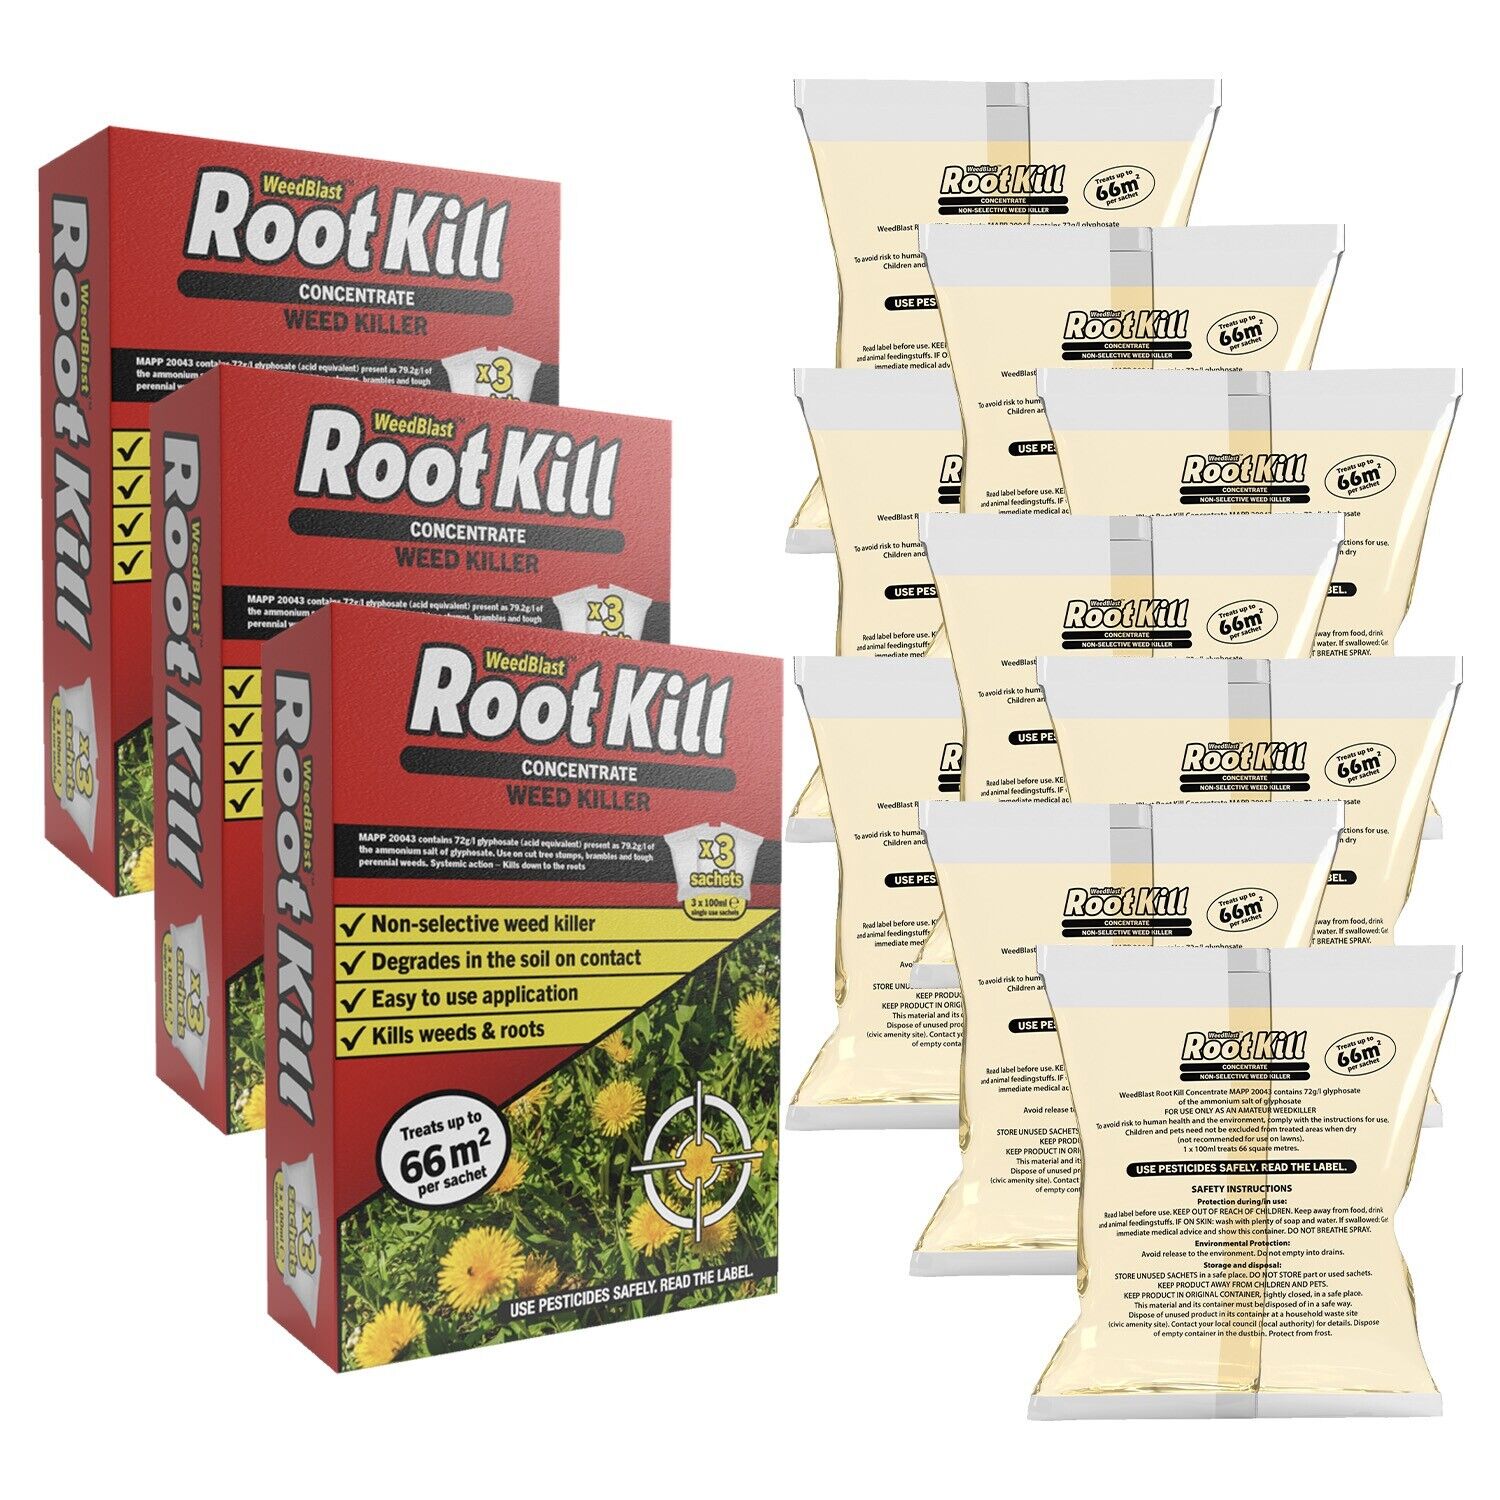 Weedblast Rootkill Concentrated Weedkiller 9 x 100 Sachets boxed